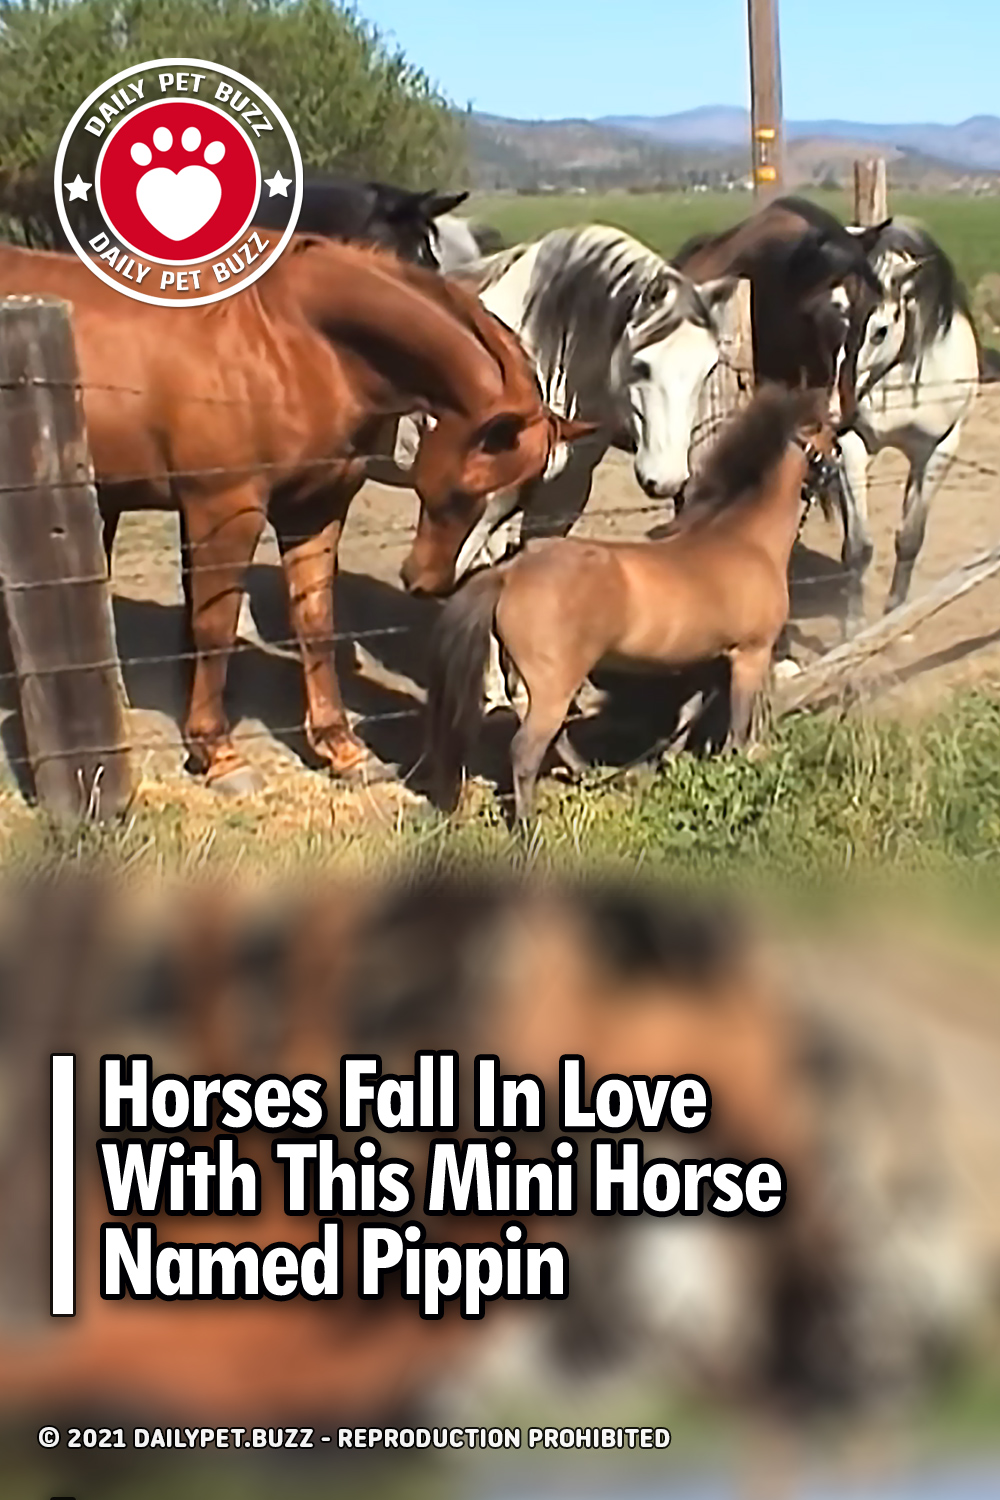 Horses Fall In Love With This Mini Horse Named Pippin